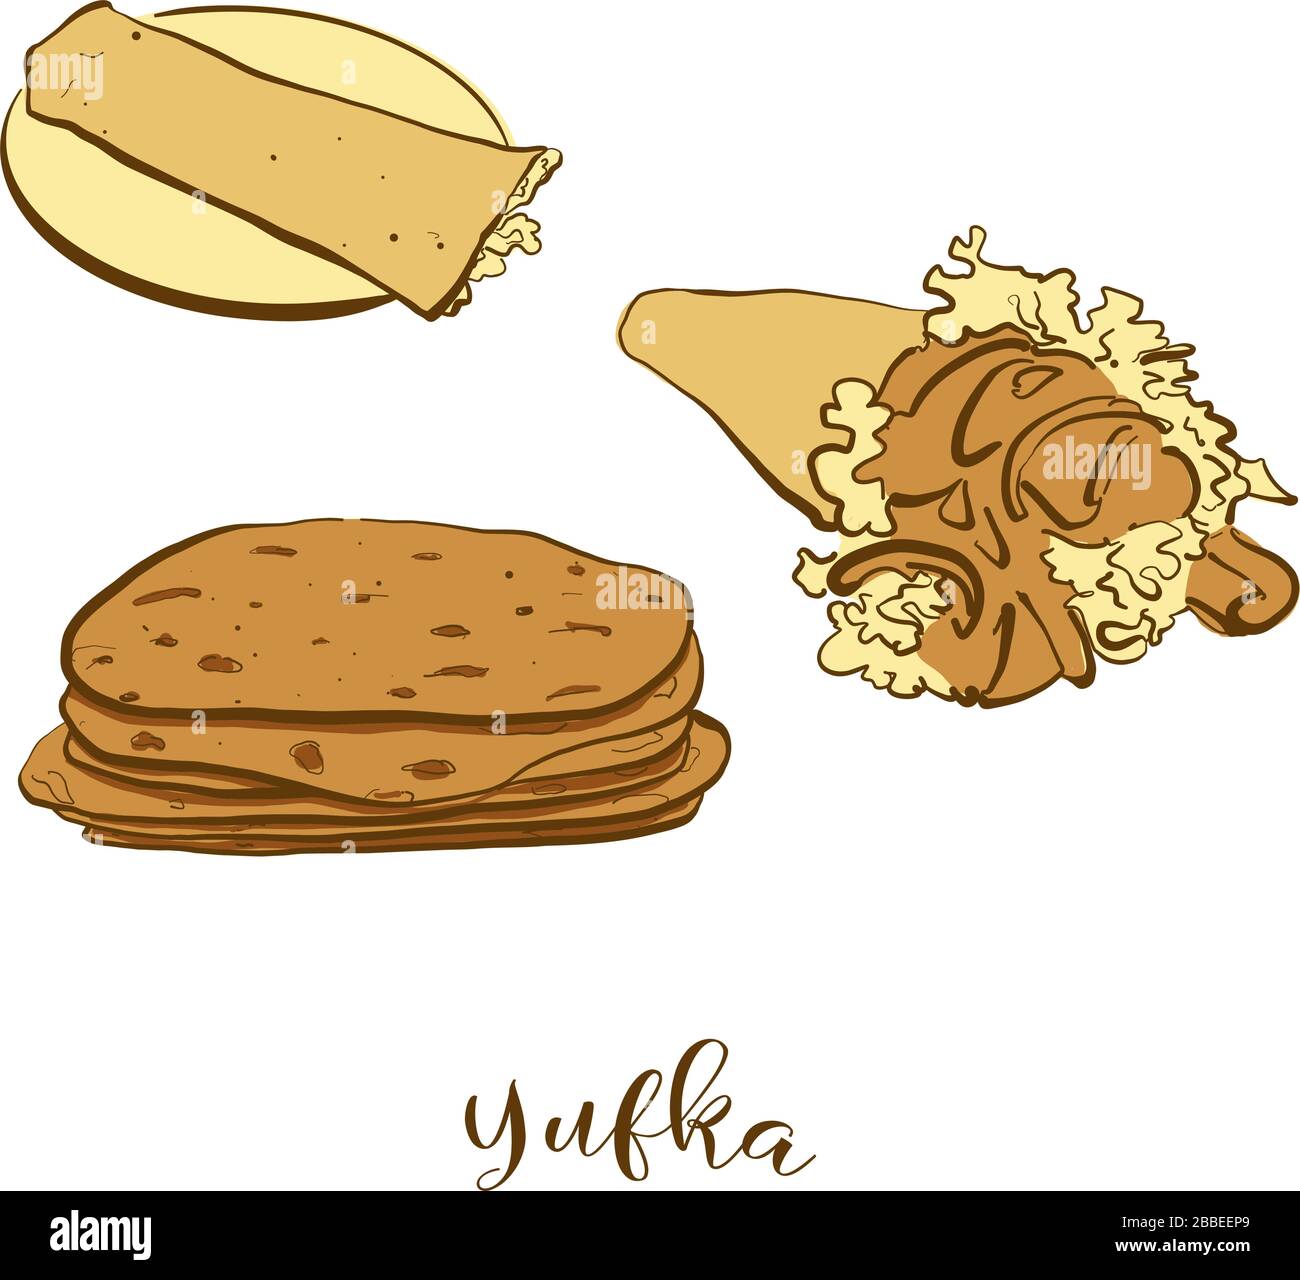 Colored drawing of Yufka bread. Vector illustration of Flatbread food, usually known in Turkey, Bulgaria. Colored Bread sketches. Stock Vector